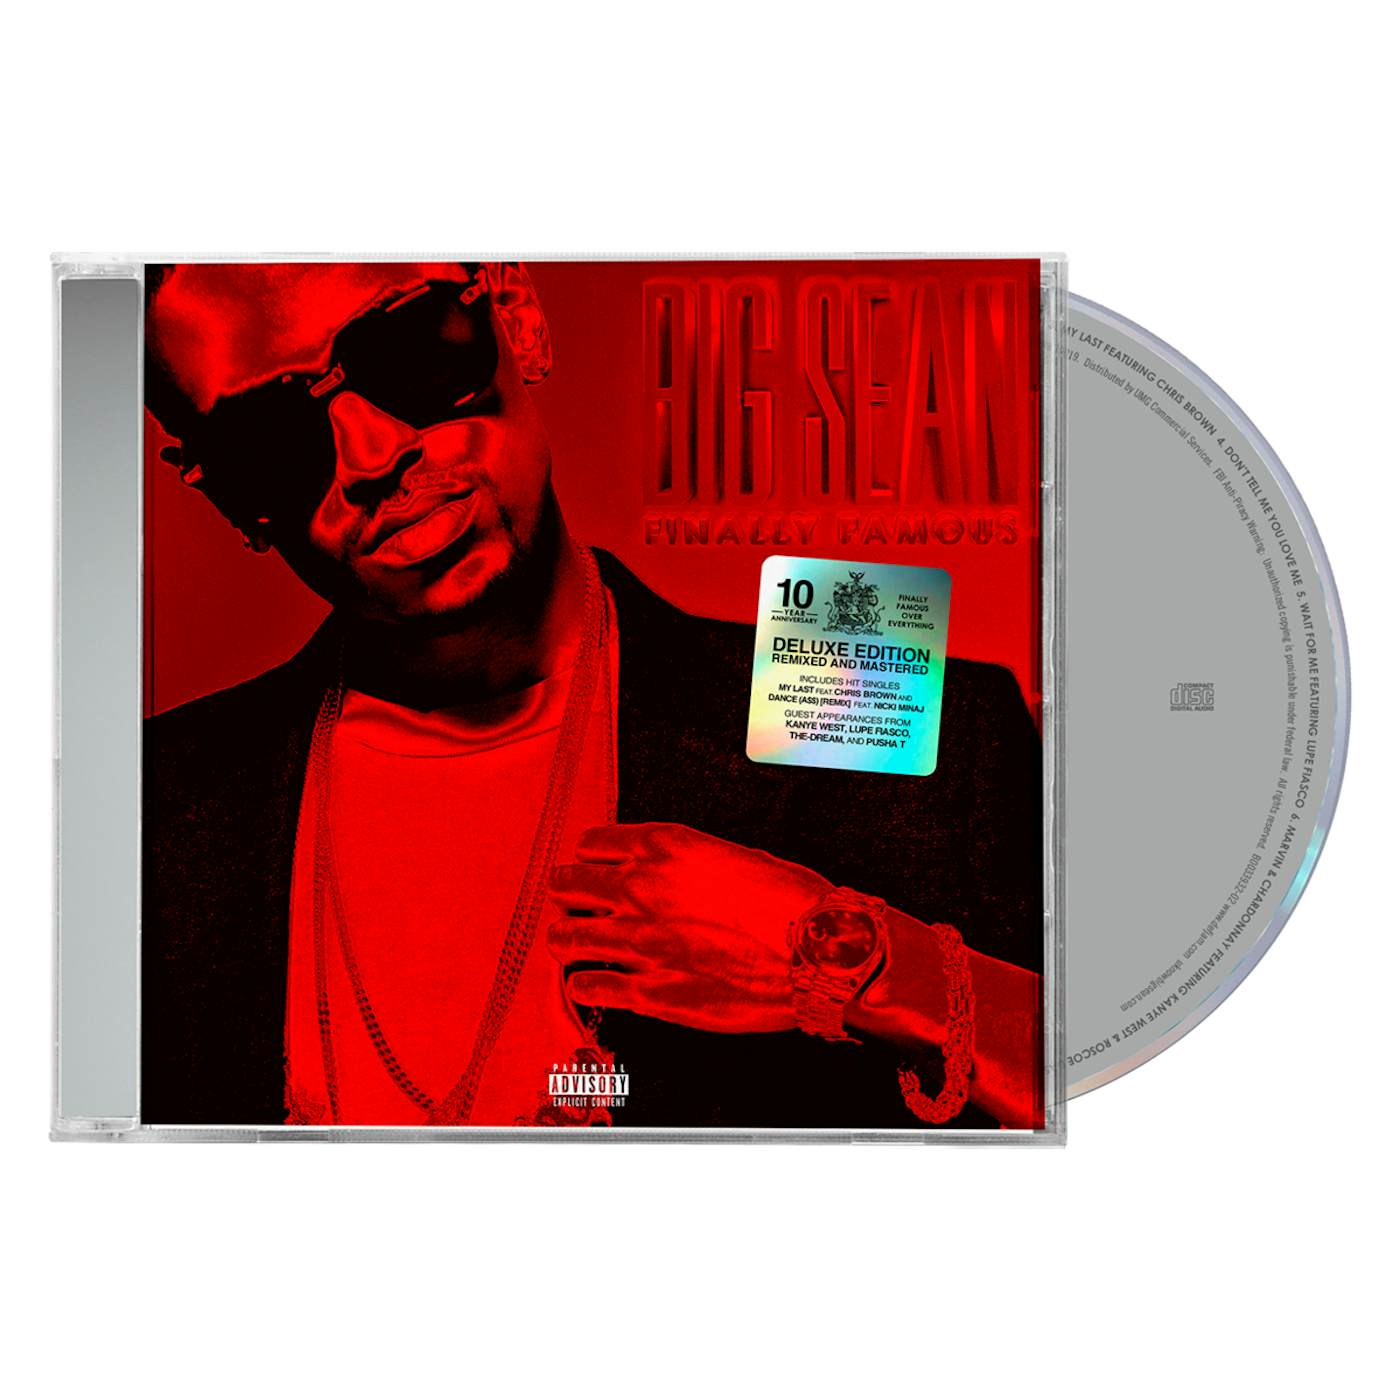 Big Sean Finally Famous 10th Anniversary Deluxe Edition (Remixed & Remastered) CD